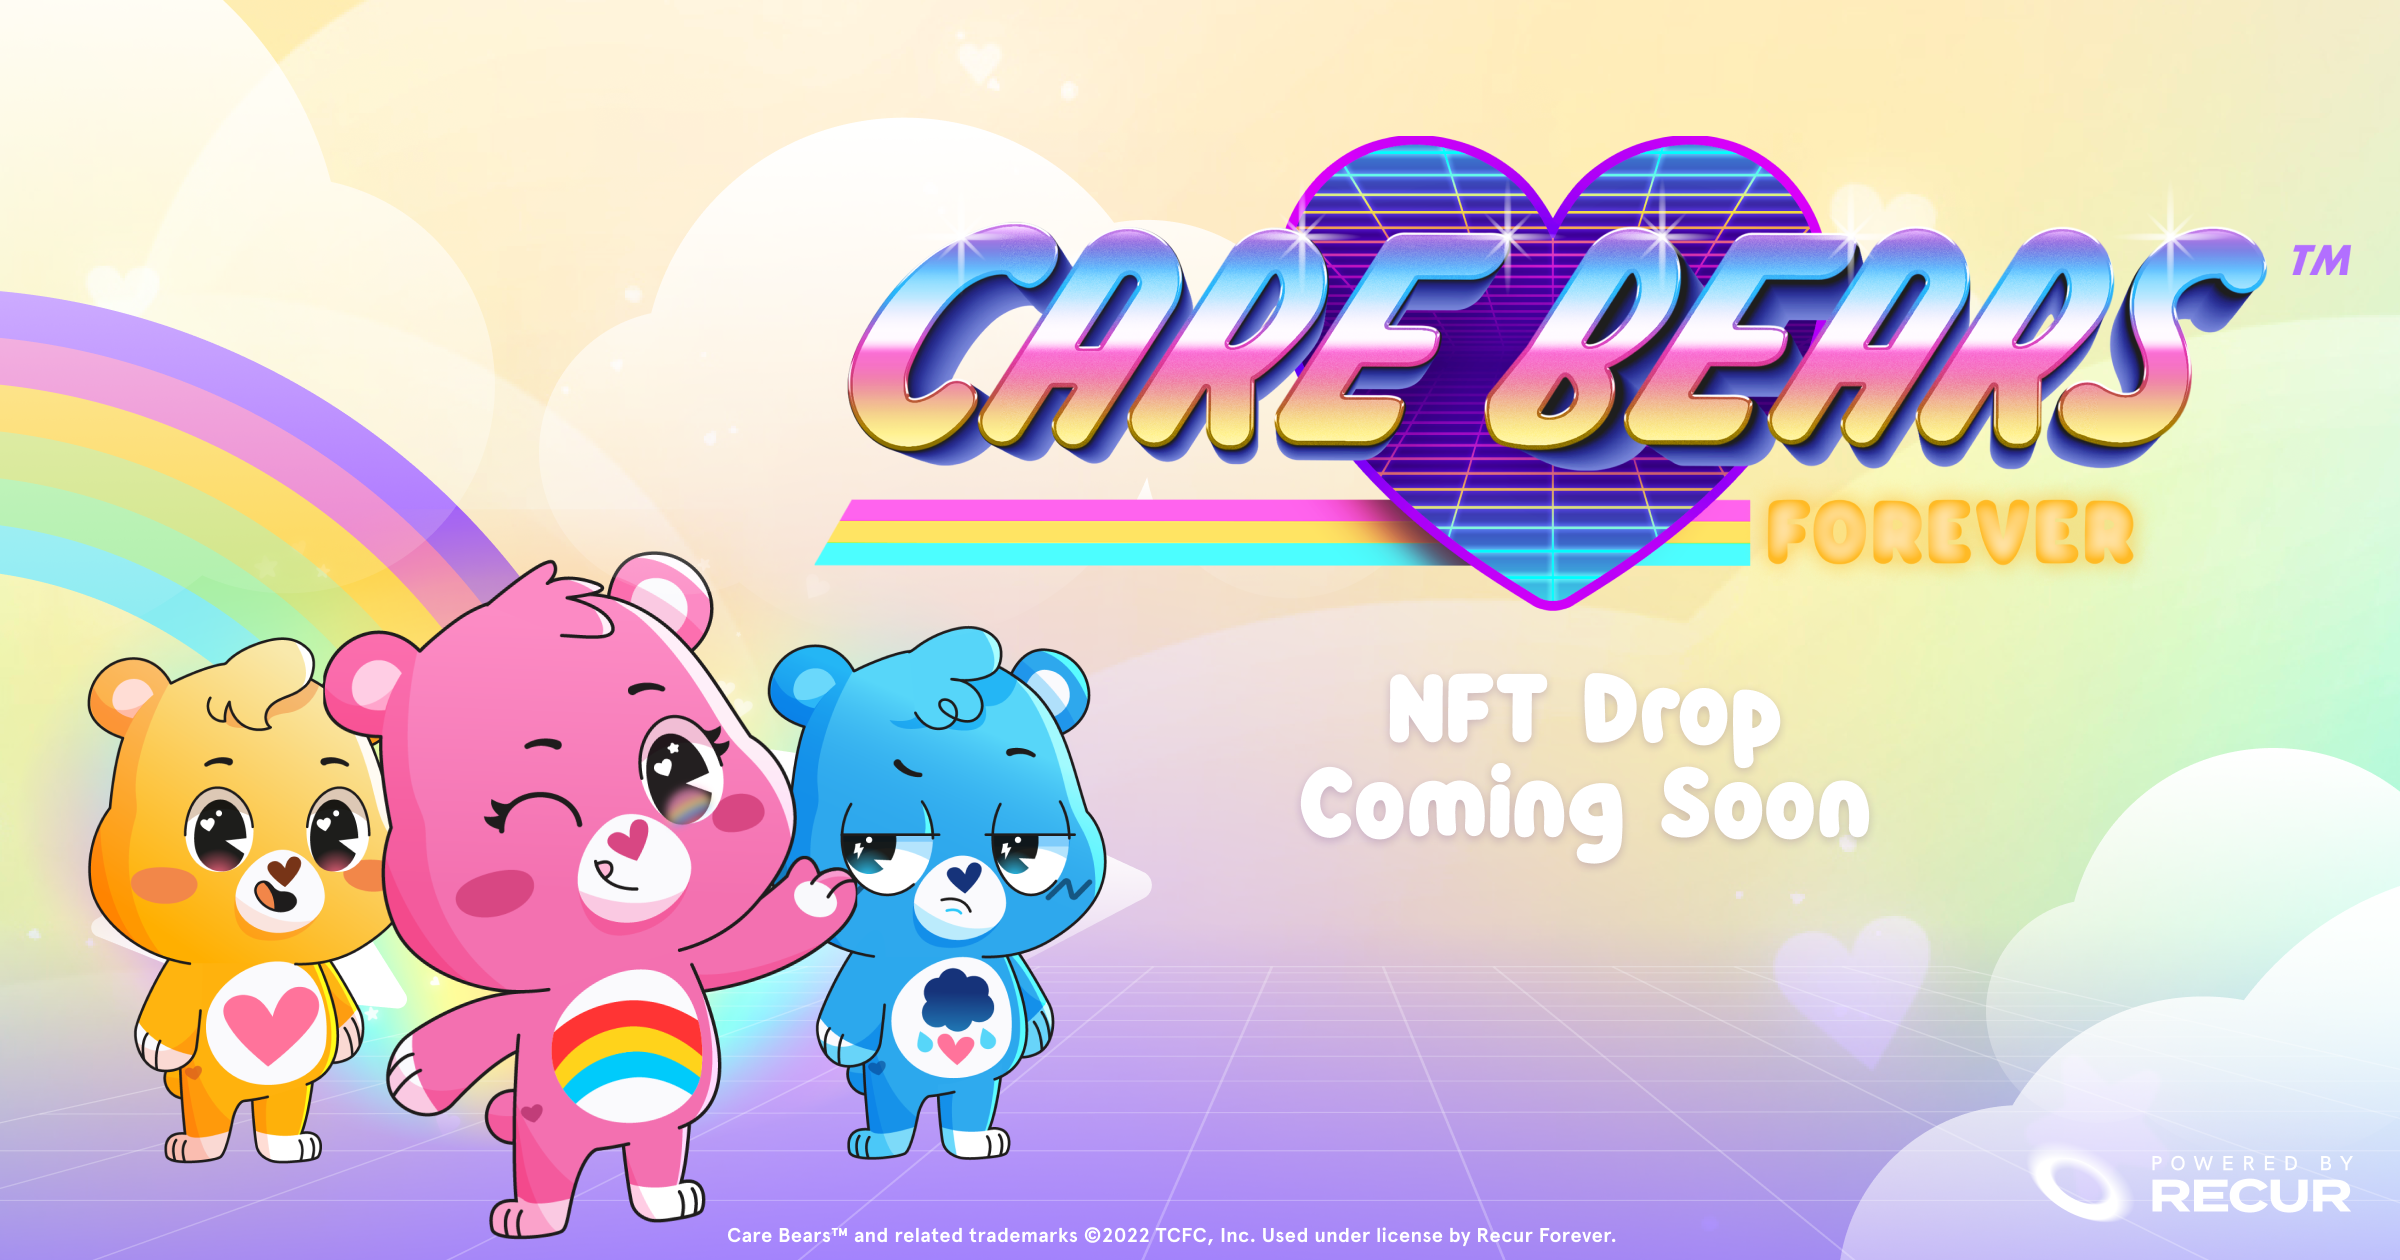 Care Bears Celebrate 40th Anniversary With NFTs, New Bears